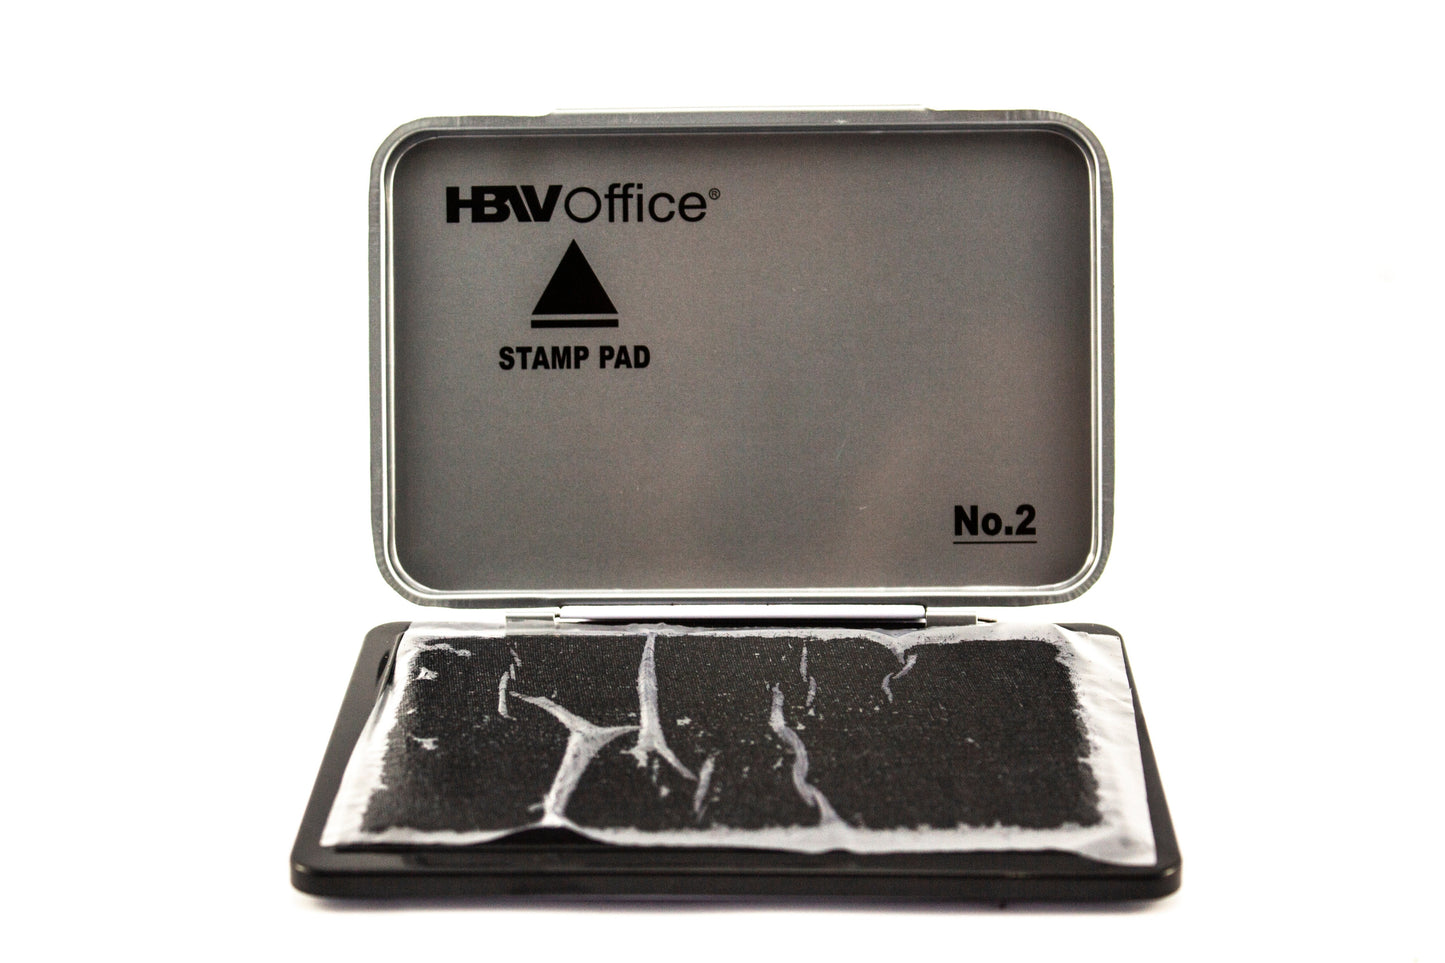 HBW Office Stamp Pad No. 2 | Sold by 12s